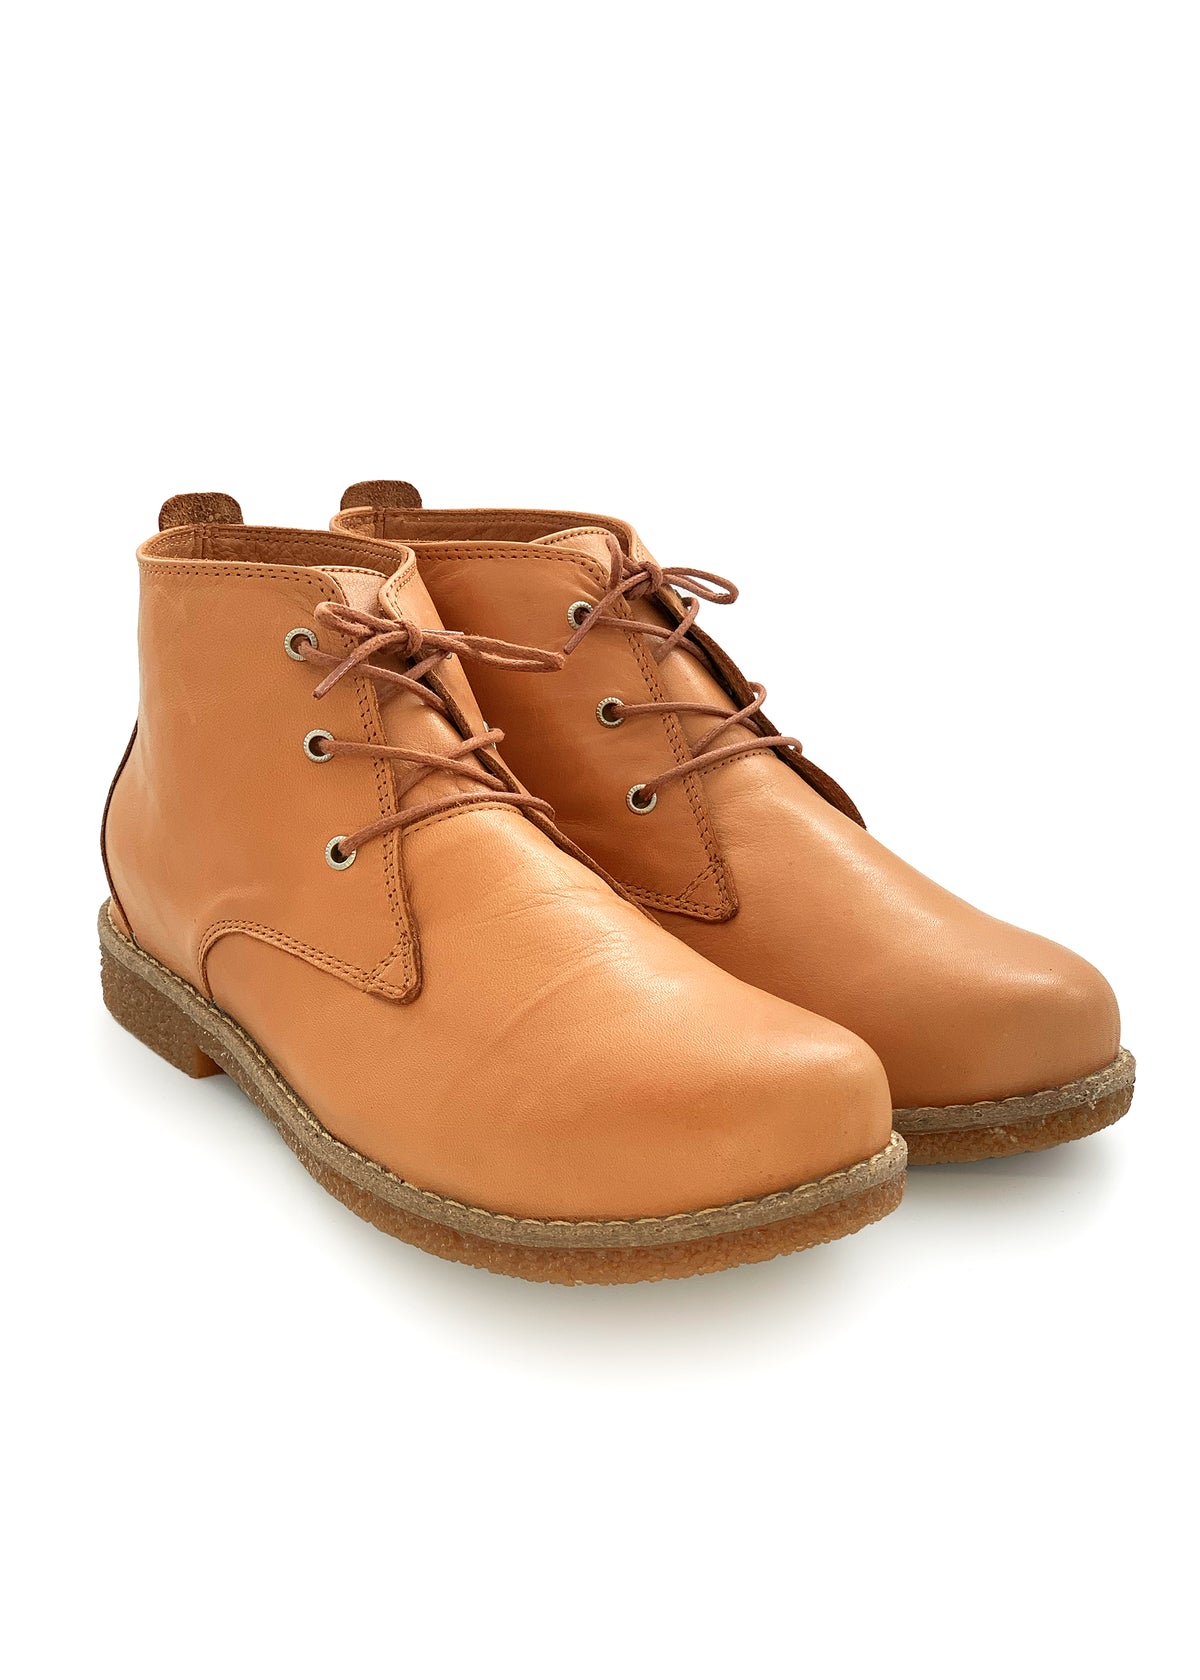 Walking shoes with a low shaft - cognac brown leather